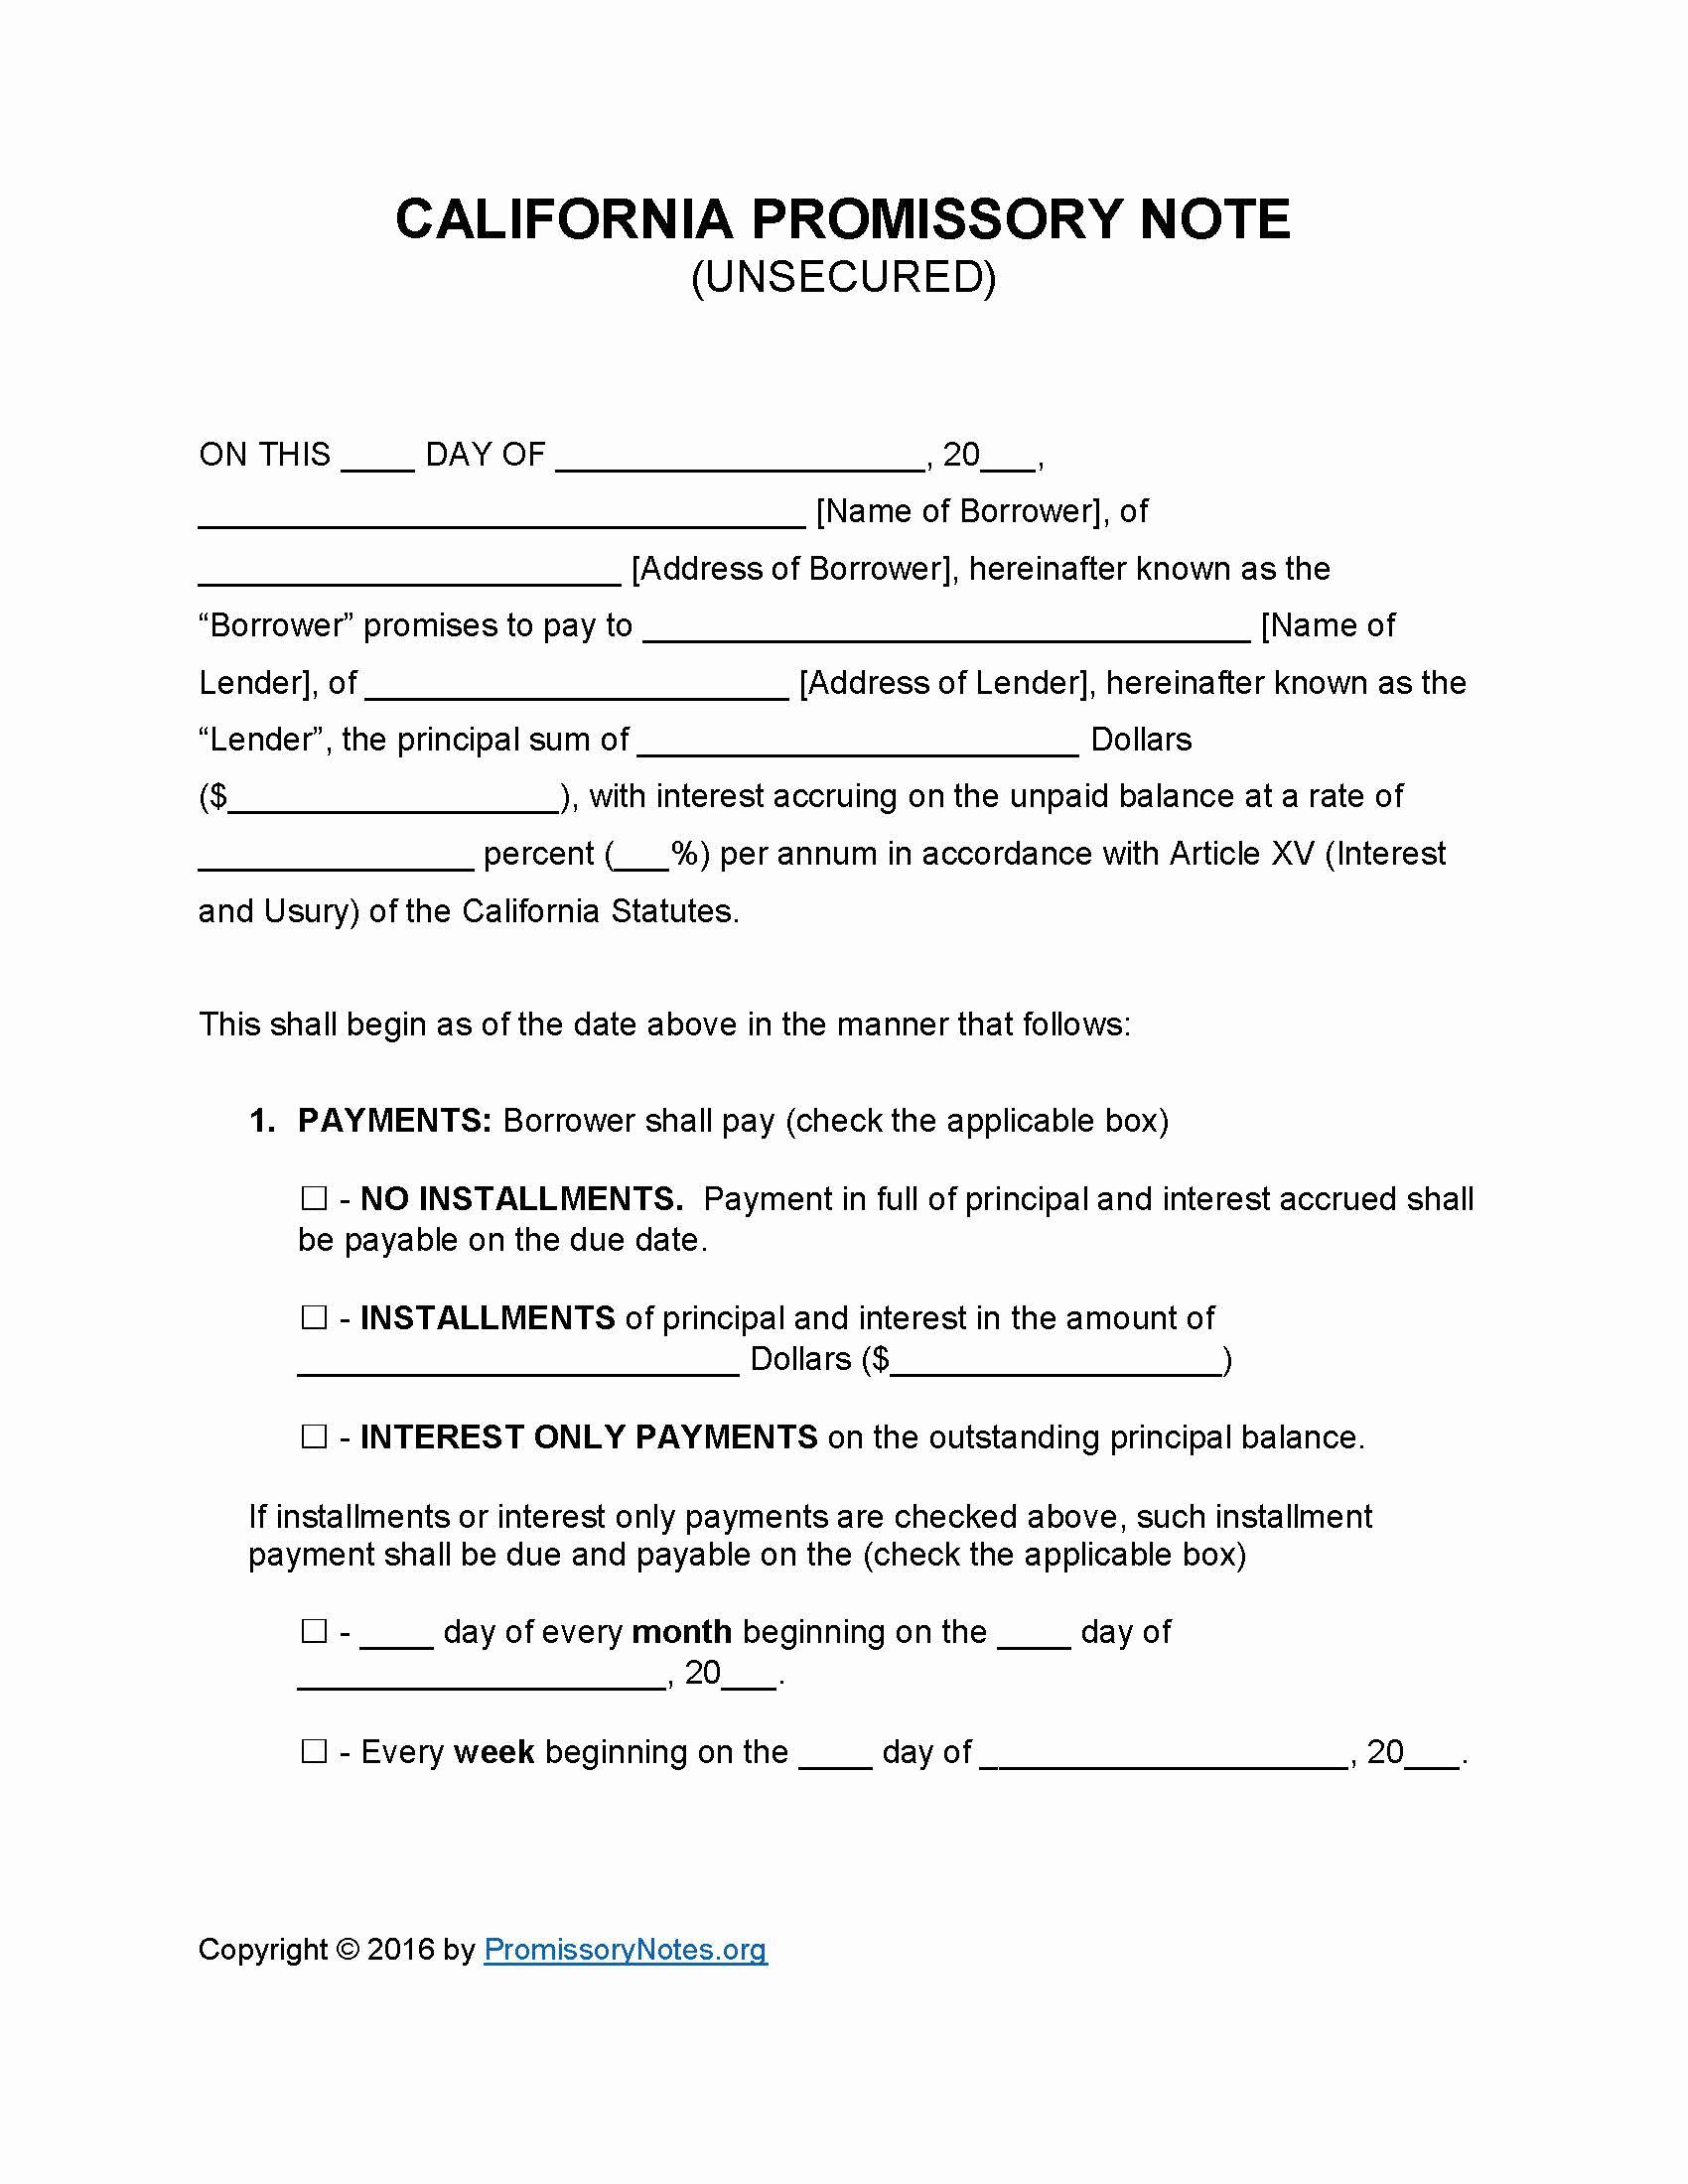 Free Secured Promissory Note Template Fresh California Unsecured Promissory Note Template Promissory